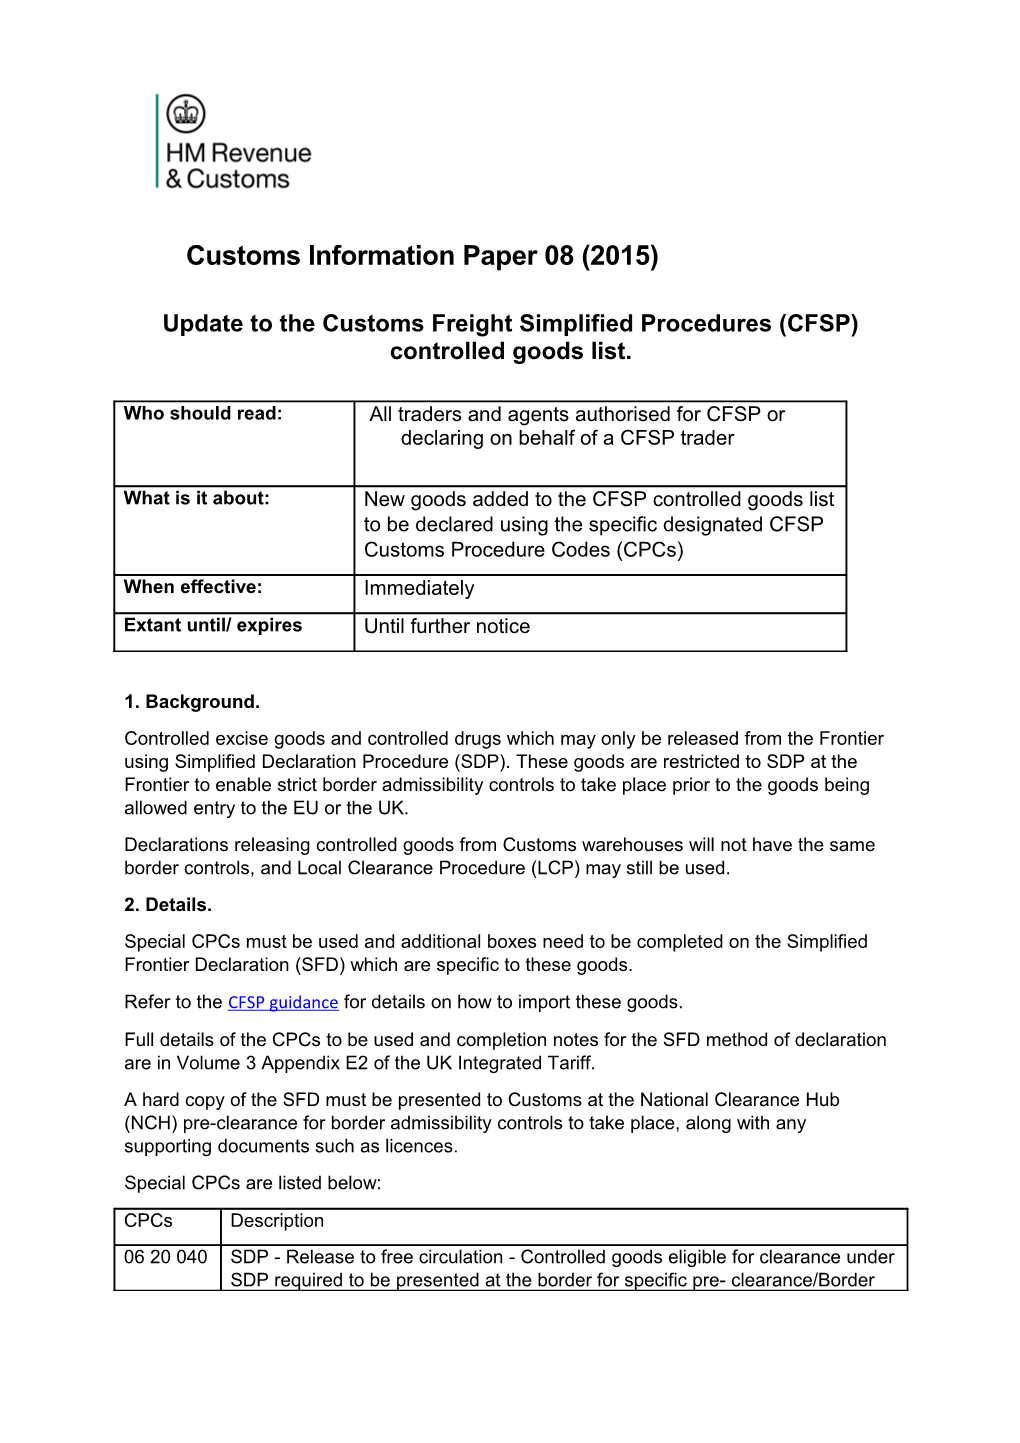 Update to the Customs Freight Simplified Procedures (CFSP) Controlled Goods List